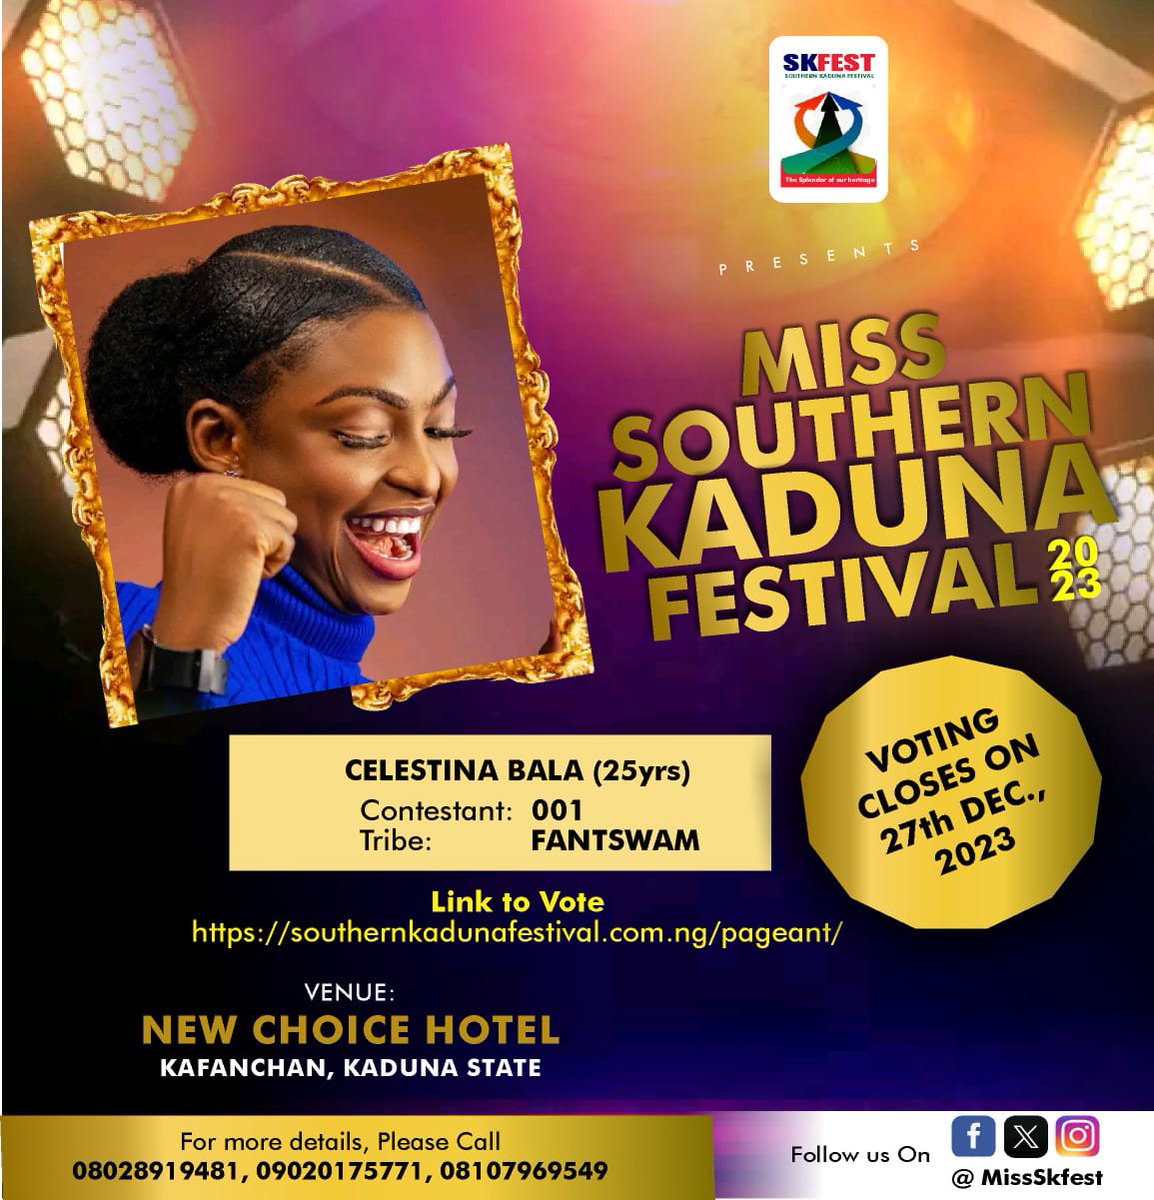 The Quest to find the MISS SOUTHERN KADUNA FESTIVAL (MISSSKFEST) just got started, kindly visit southernkadunafestival.com.ng Click on ur favorite contestant and vote.